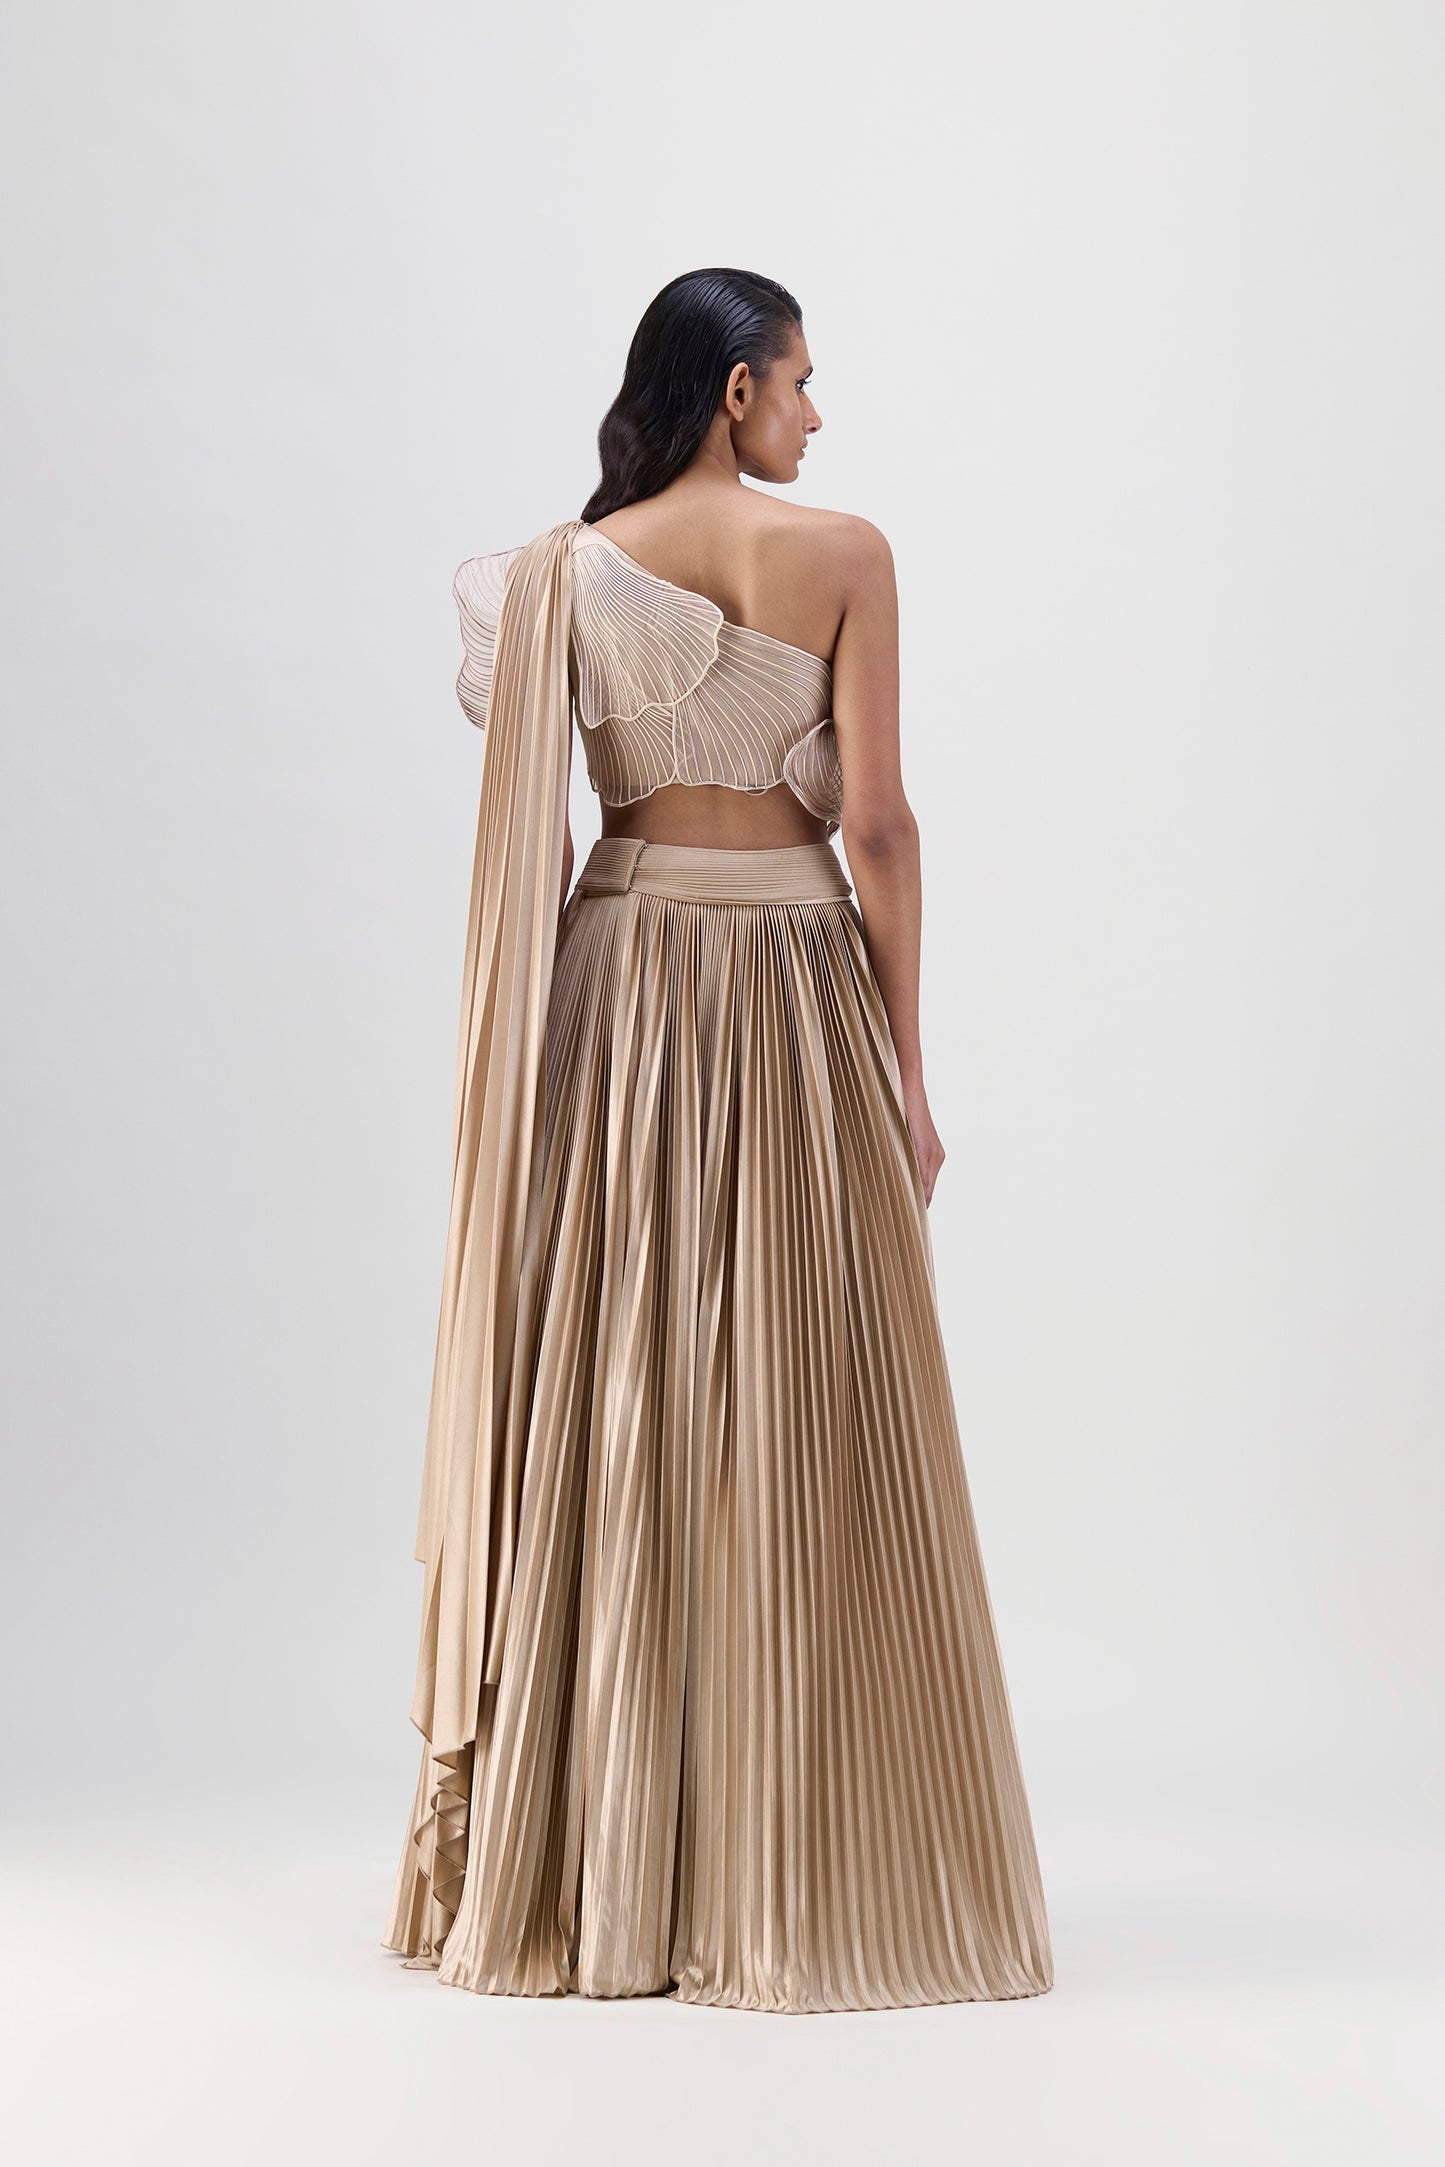 CORDED CORAL TOP AND  PLISSÉ  SKIRT